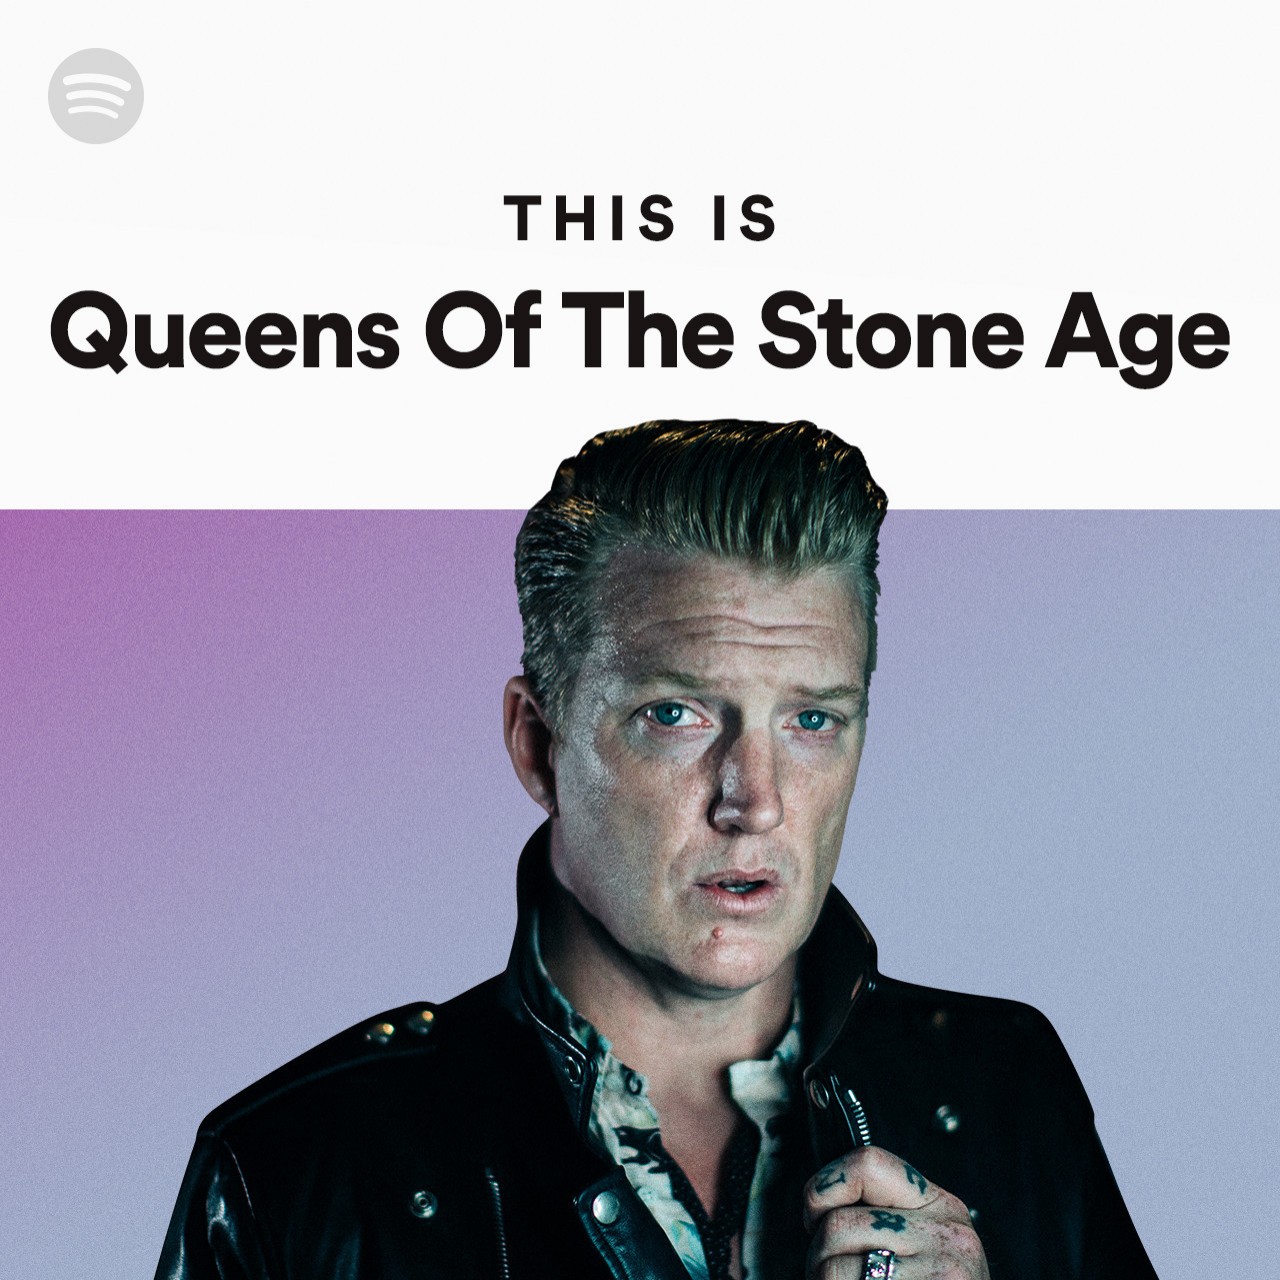 This Is Queens of the Stone Age